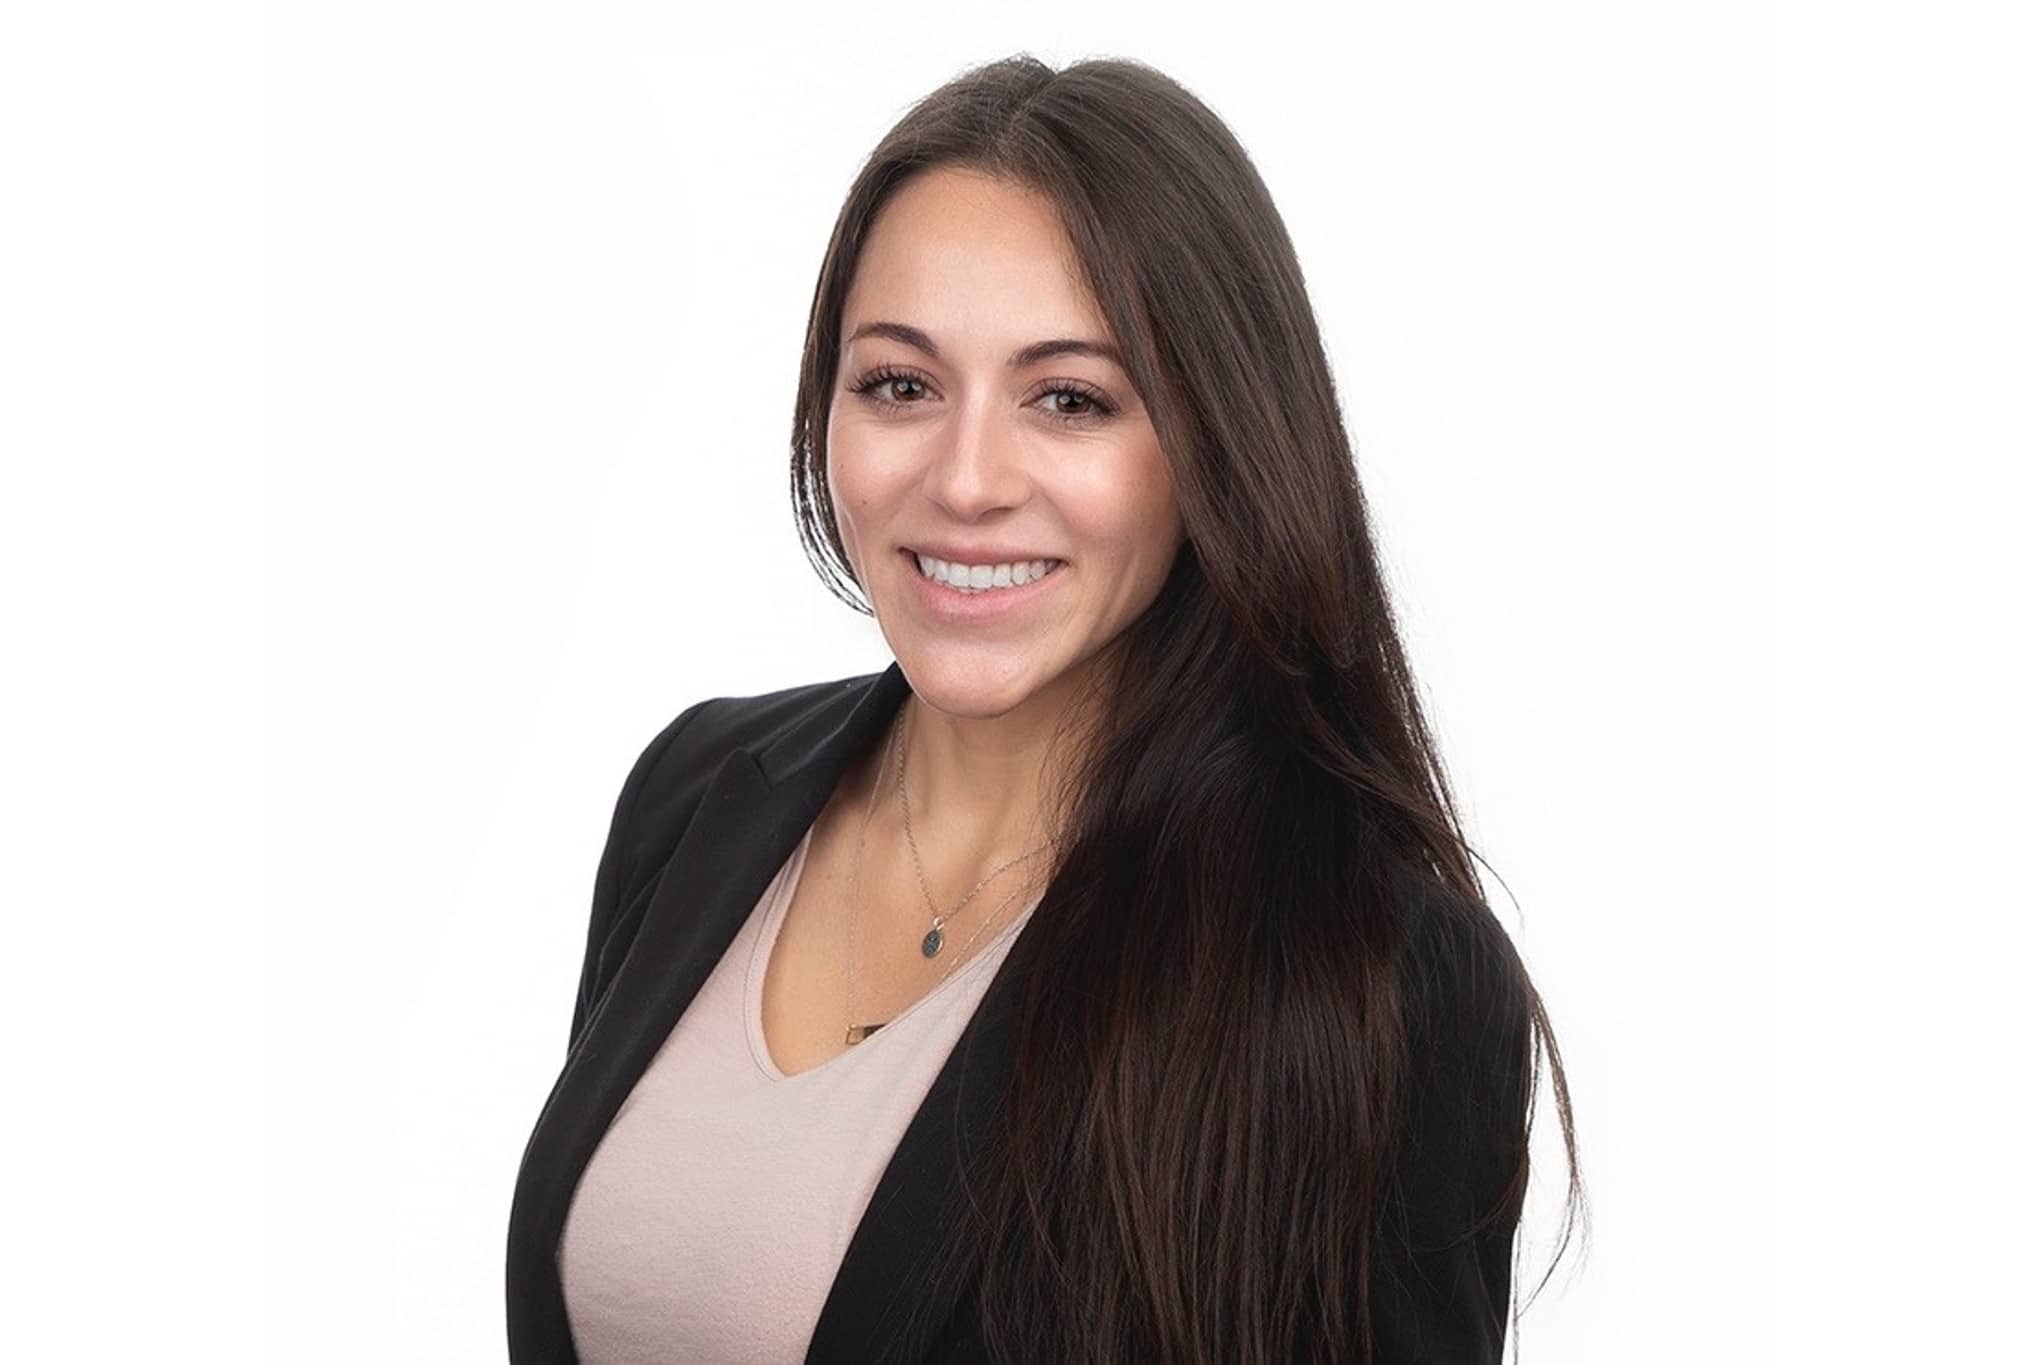 Woman smiling for professional headshot